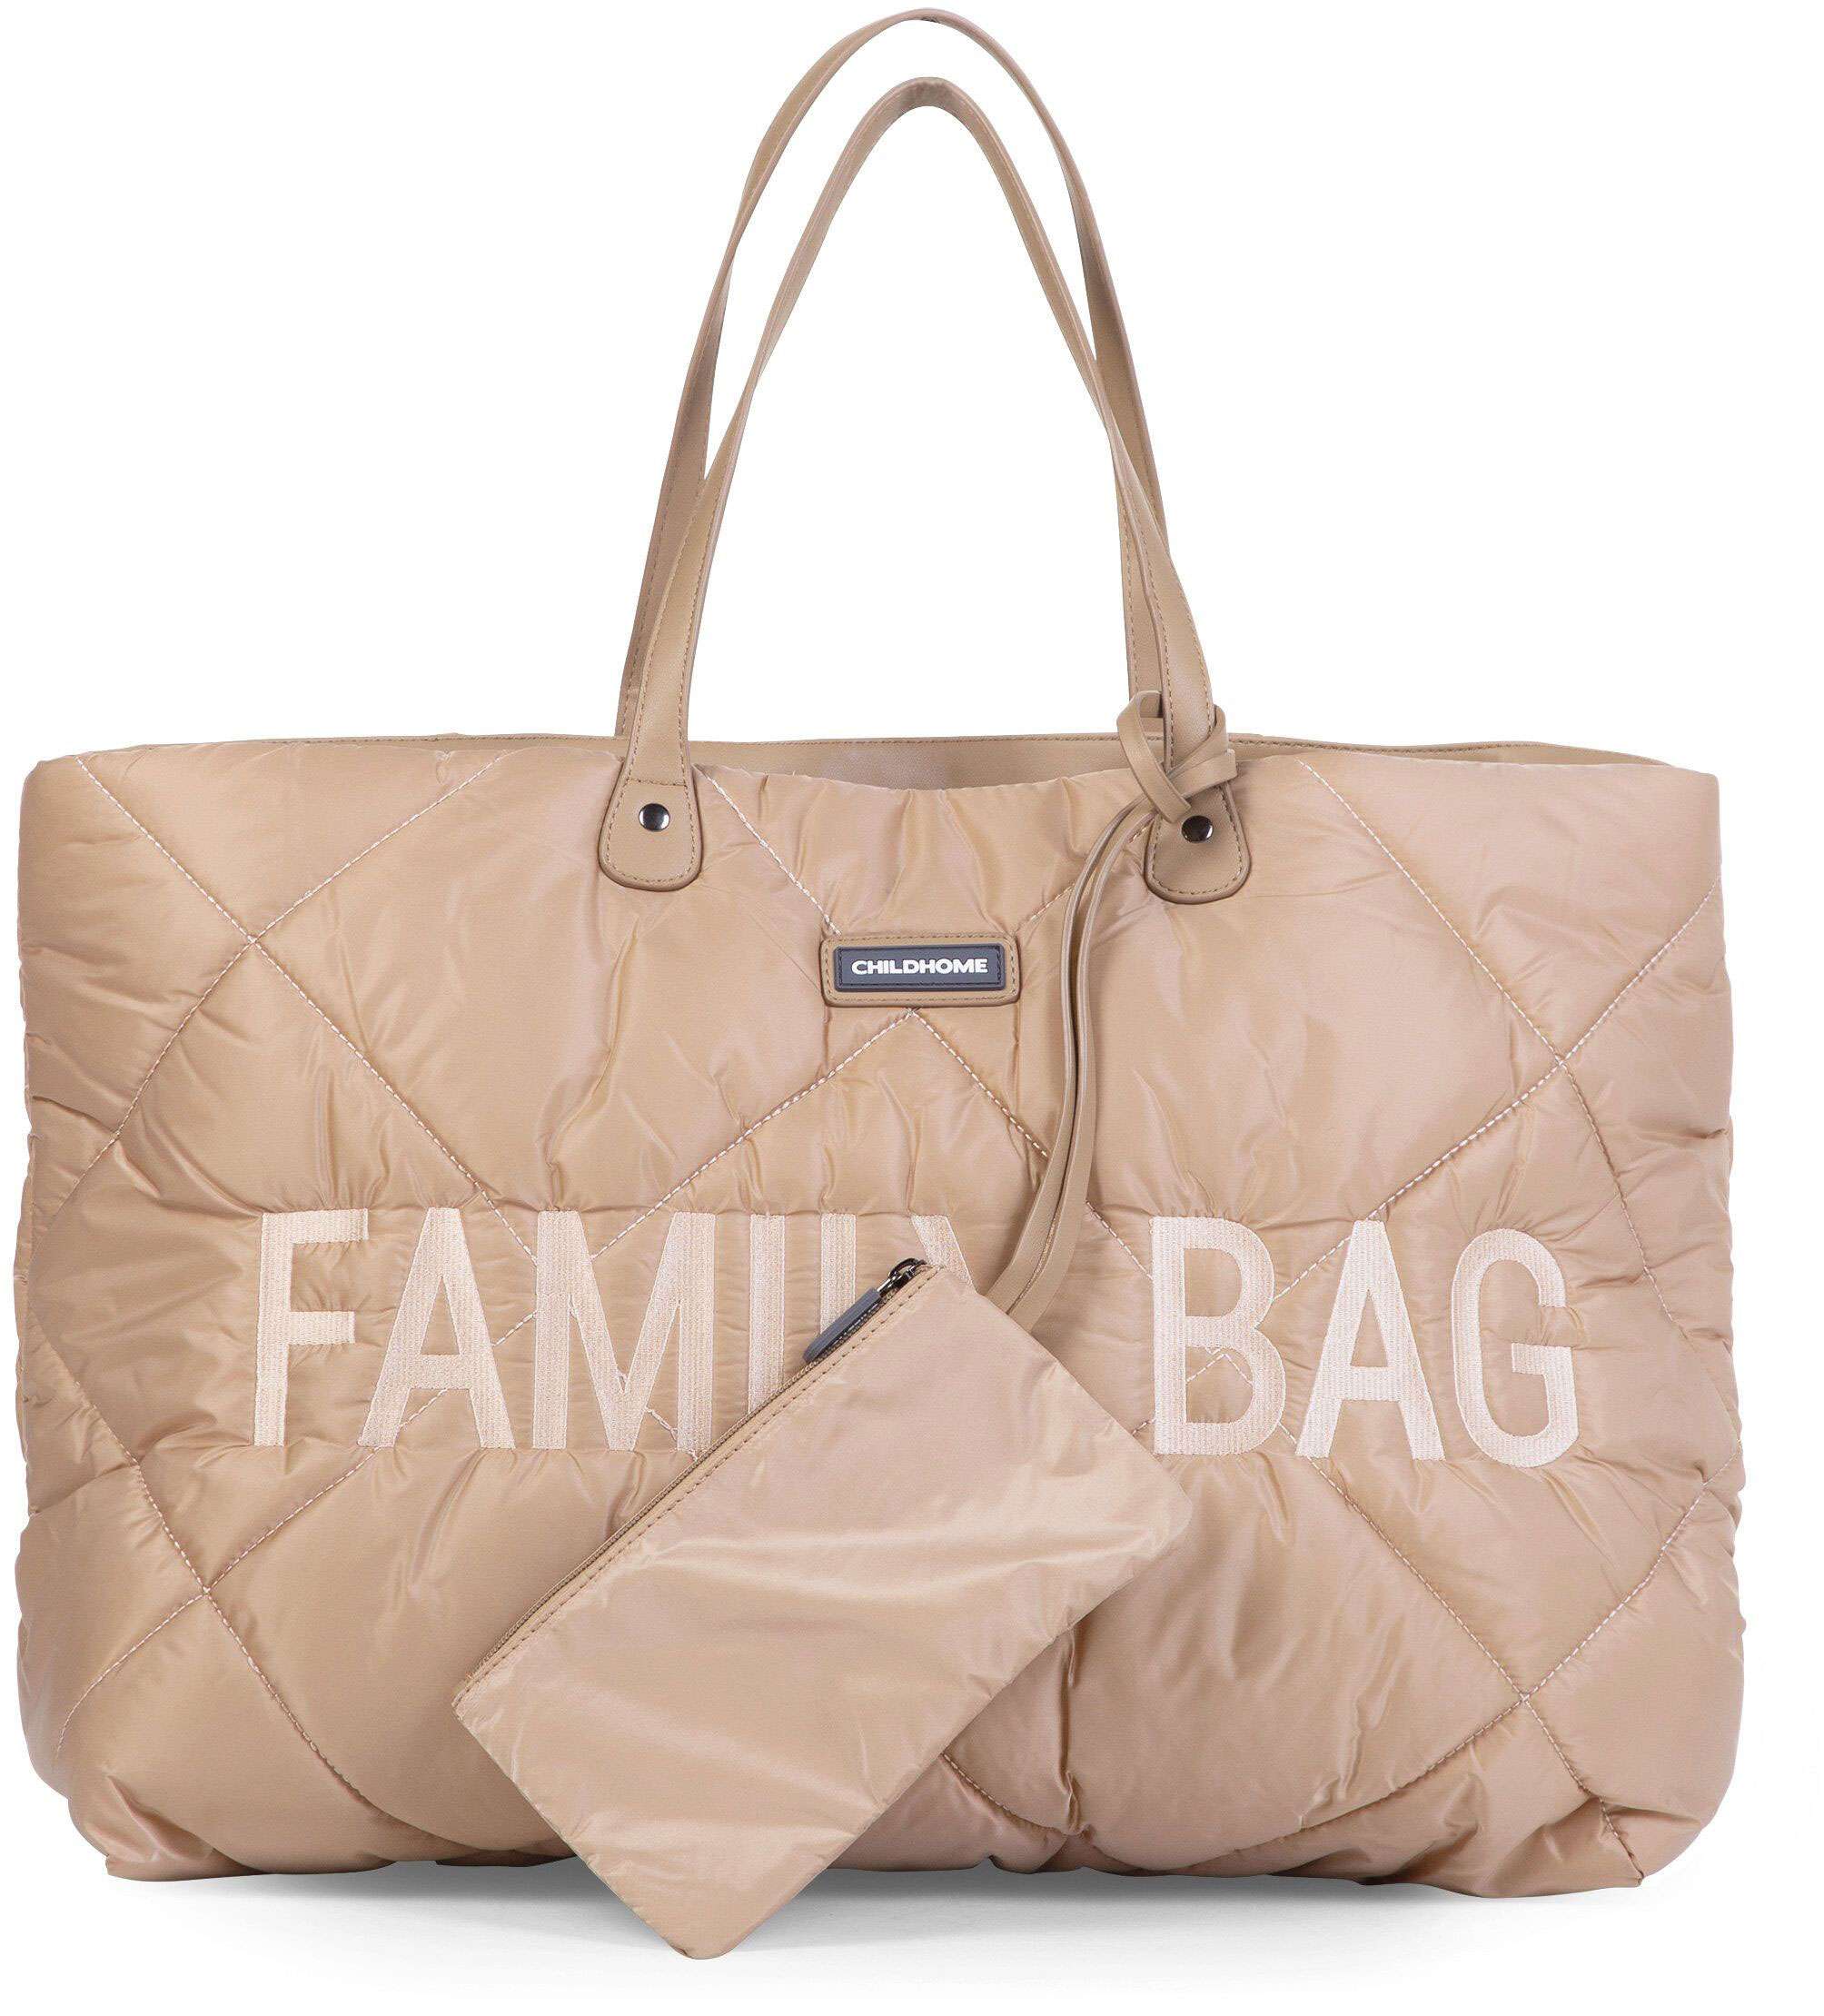 Family Bag Quilted Puffered Beige - ChildHome